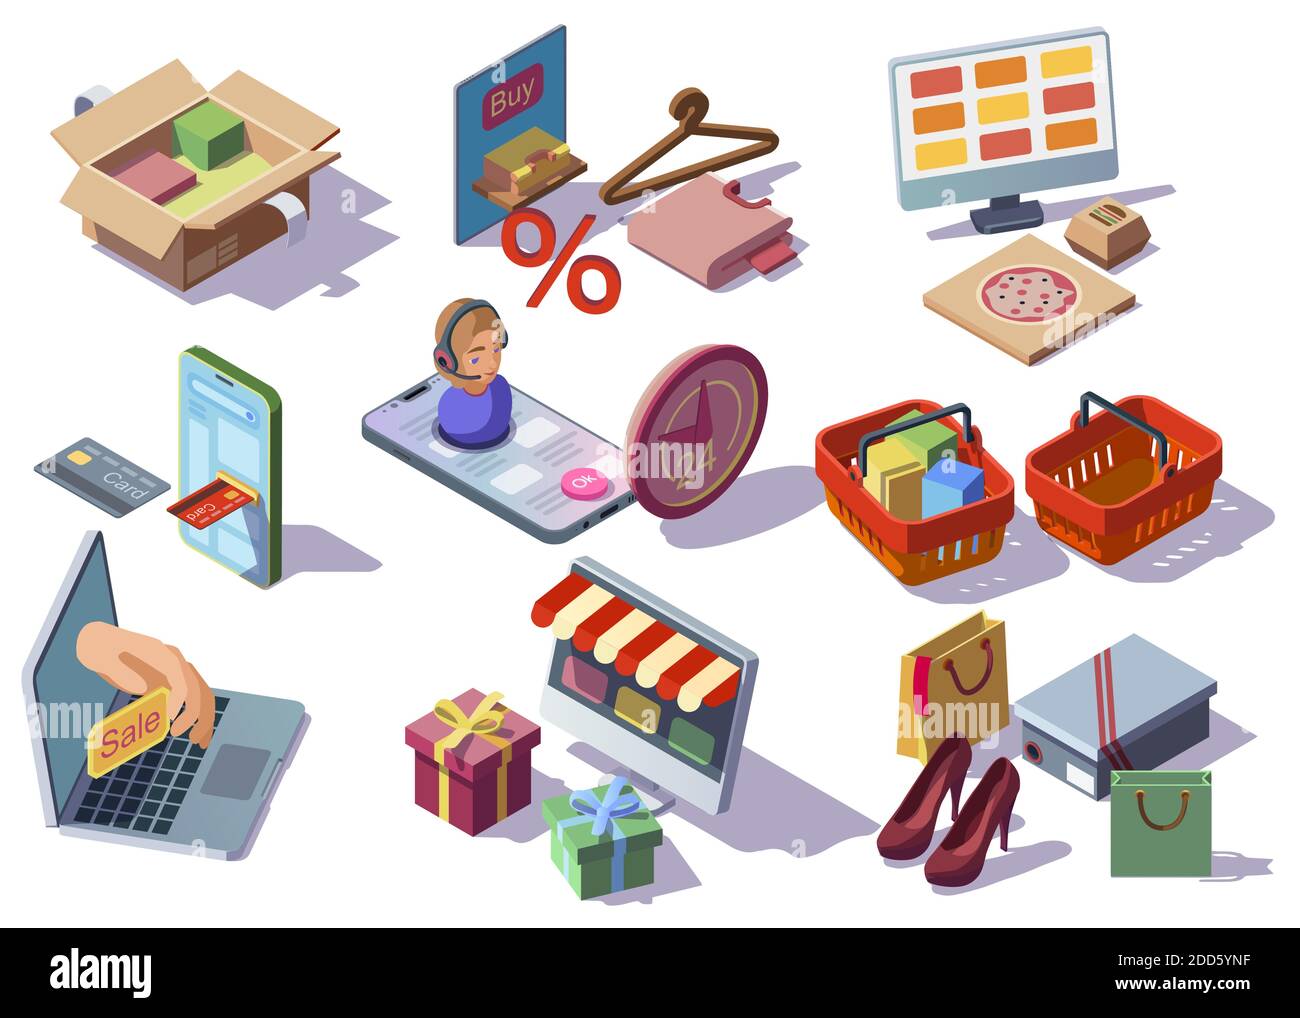 Online shopping, internet shop isometric icons collection with goods, purchases, food, gifts, baskets, packages, clothes and shoes ecommerce stores Stock Vector